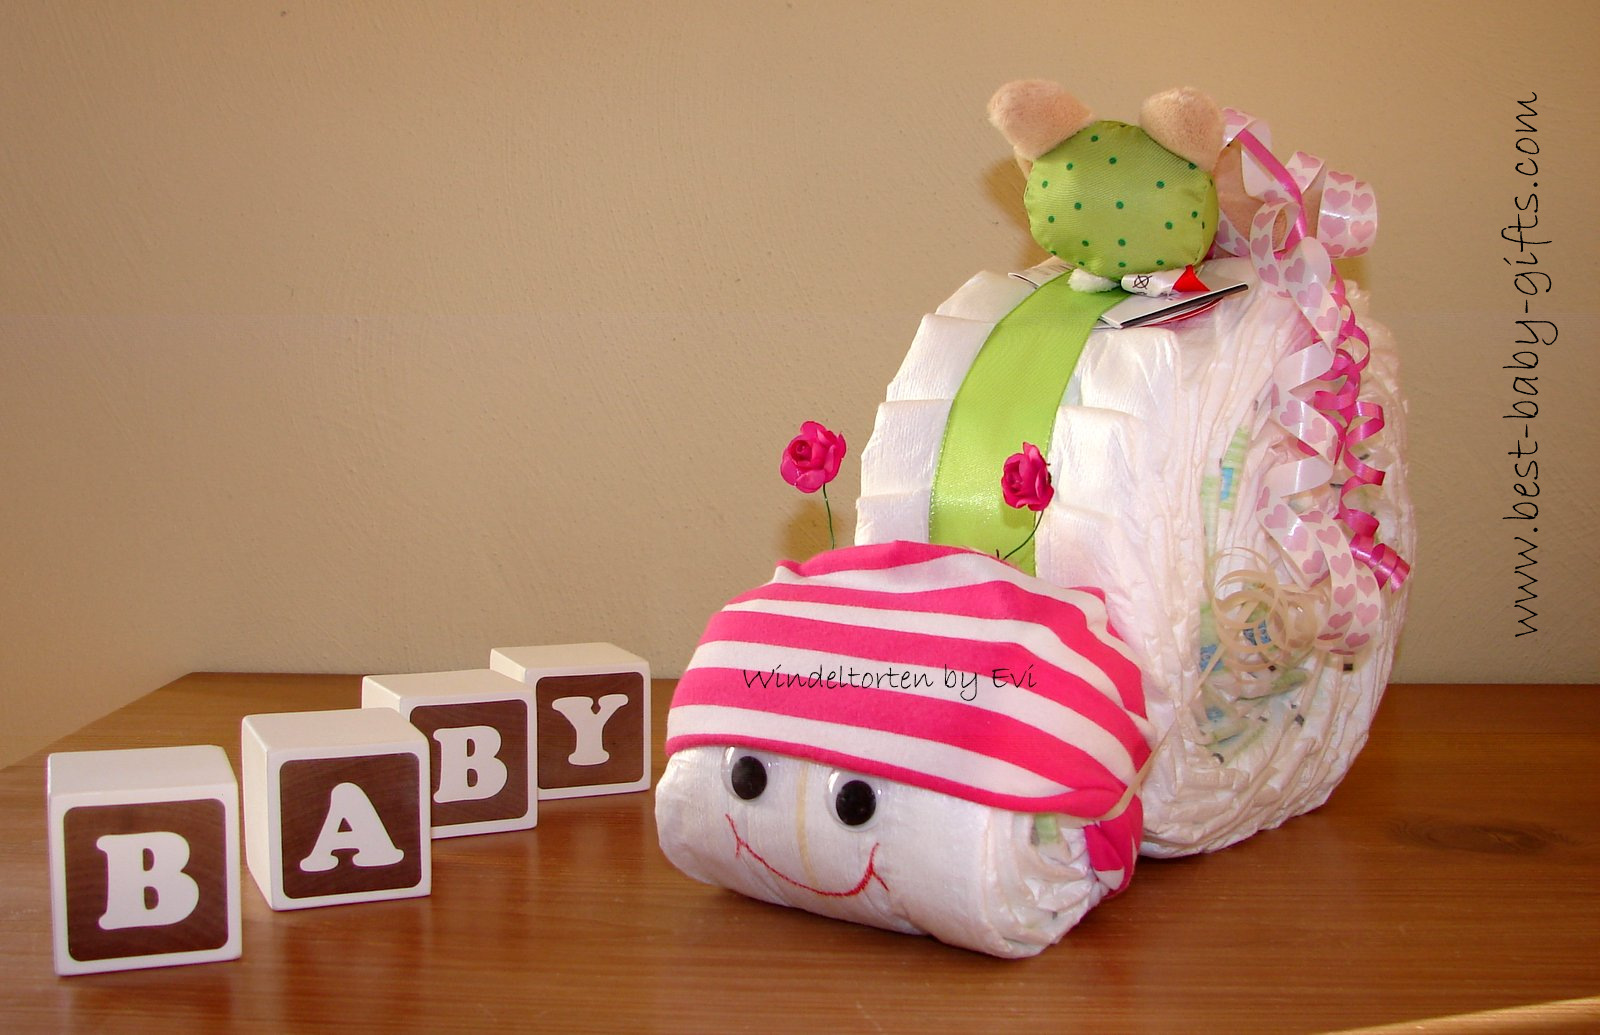 Ship Ahoy It's a Boy baby gift basket - Baby Showers By Mail